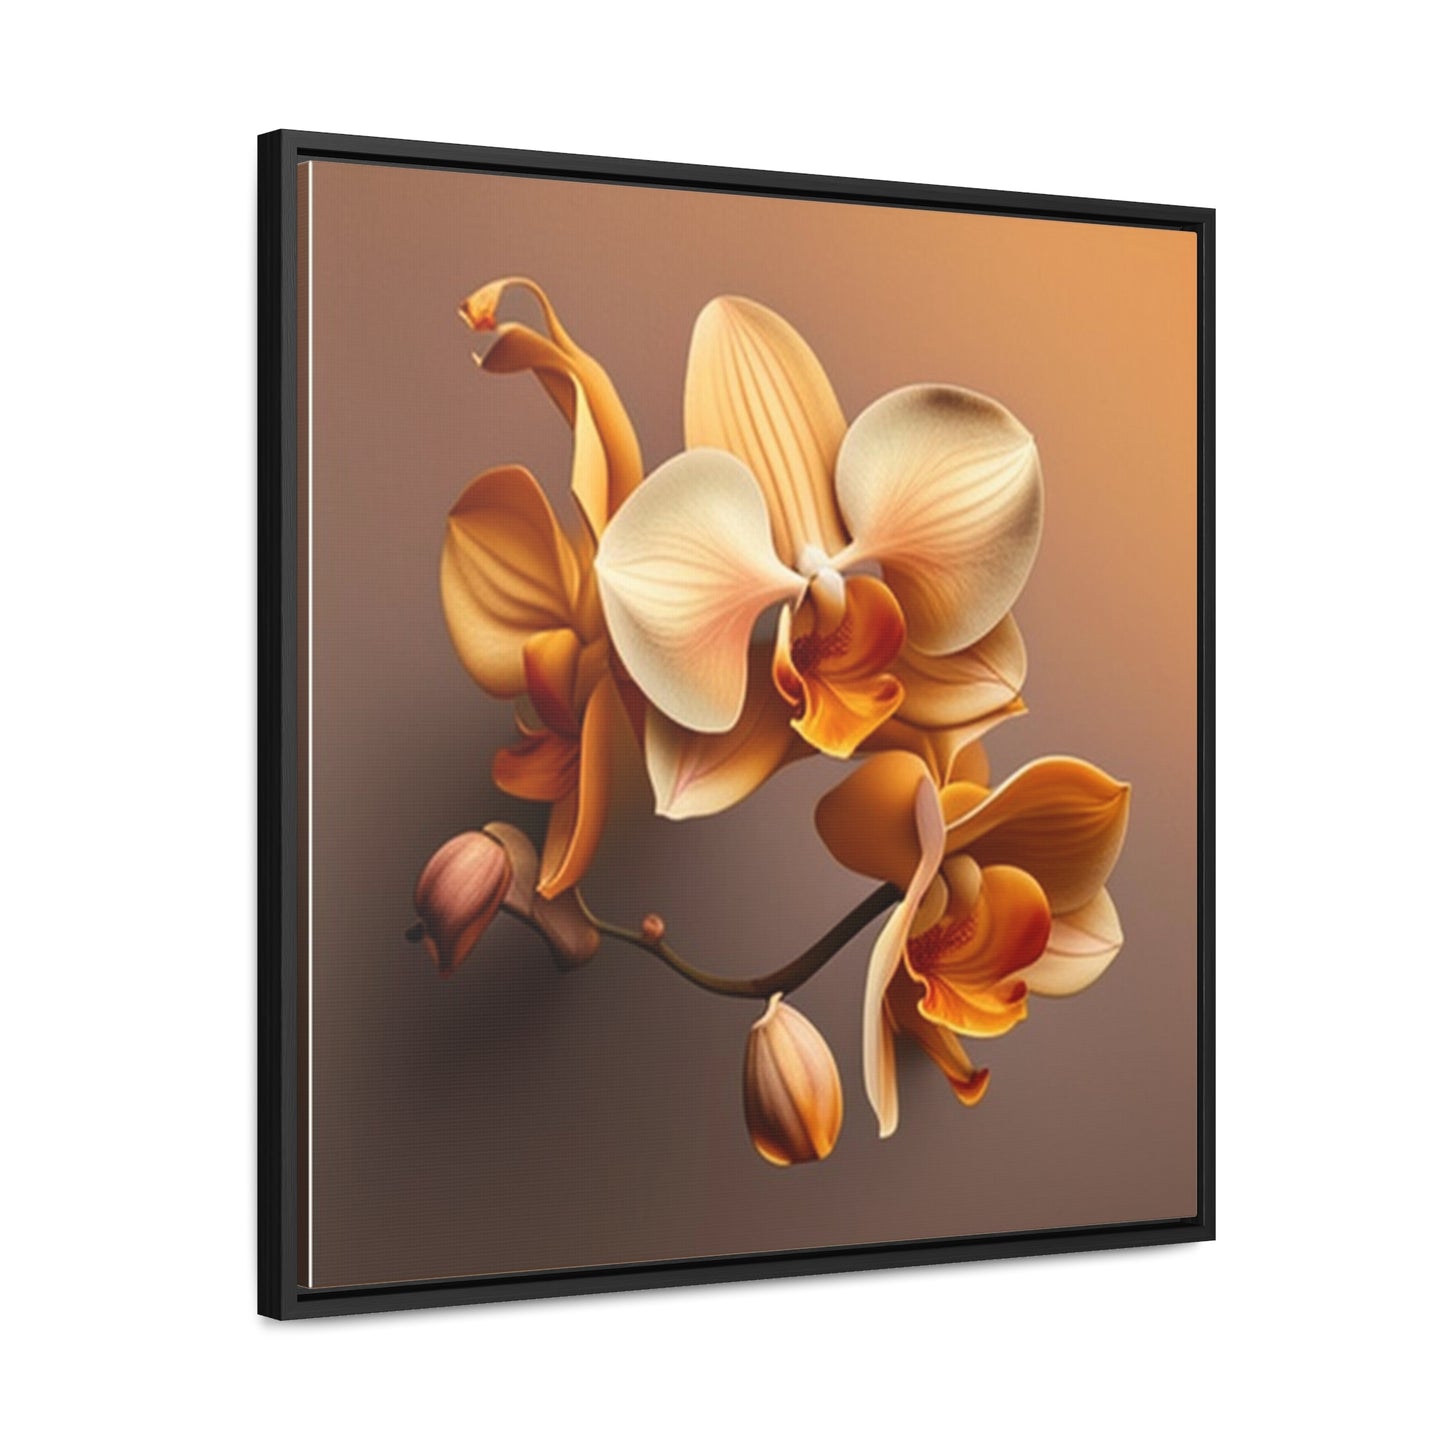 Gallery Canvas Wraps, Square Frame orchid pedals 2